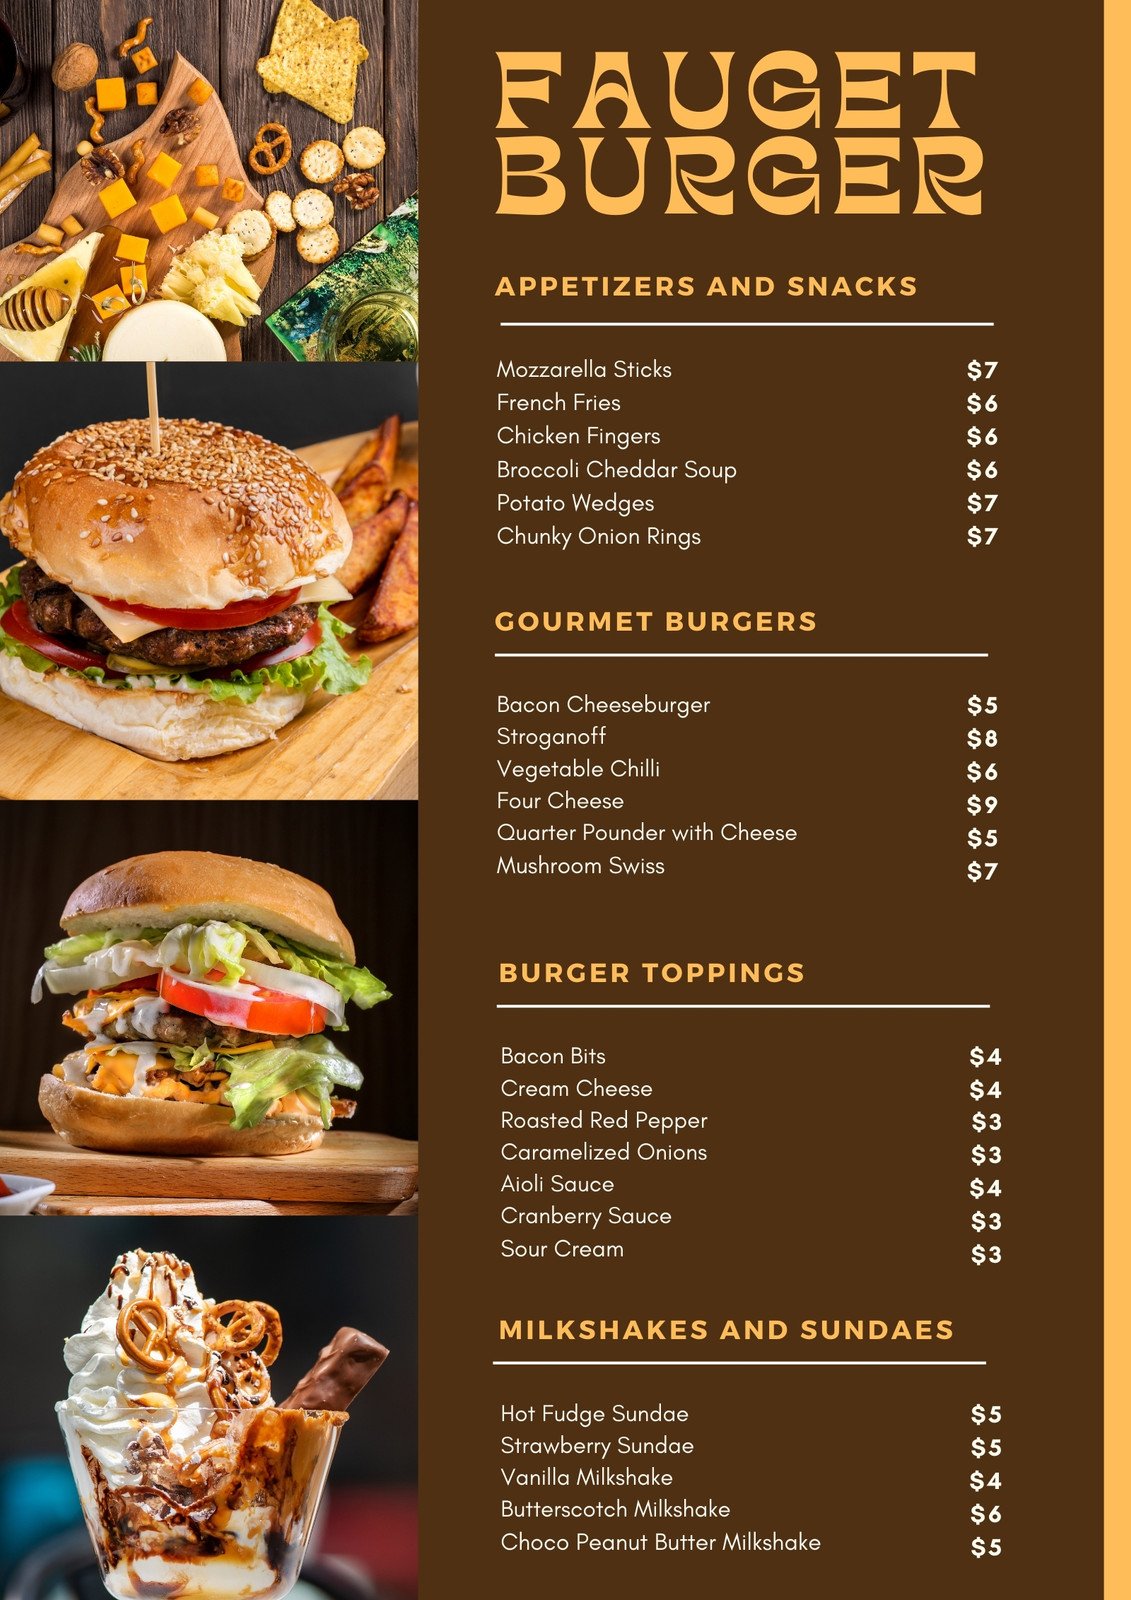 yellow-fast-food-restaurant-menu-templates-by-canva-vlr-eng-br